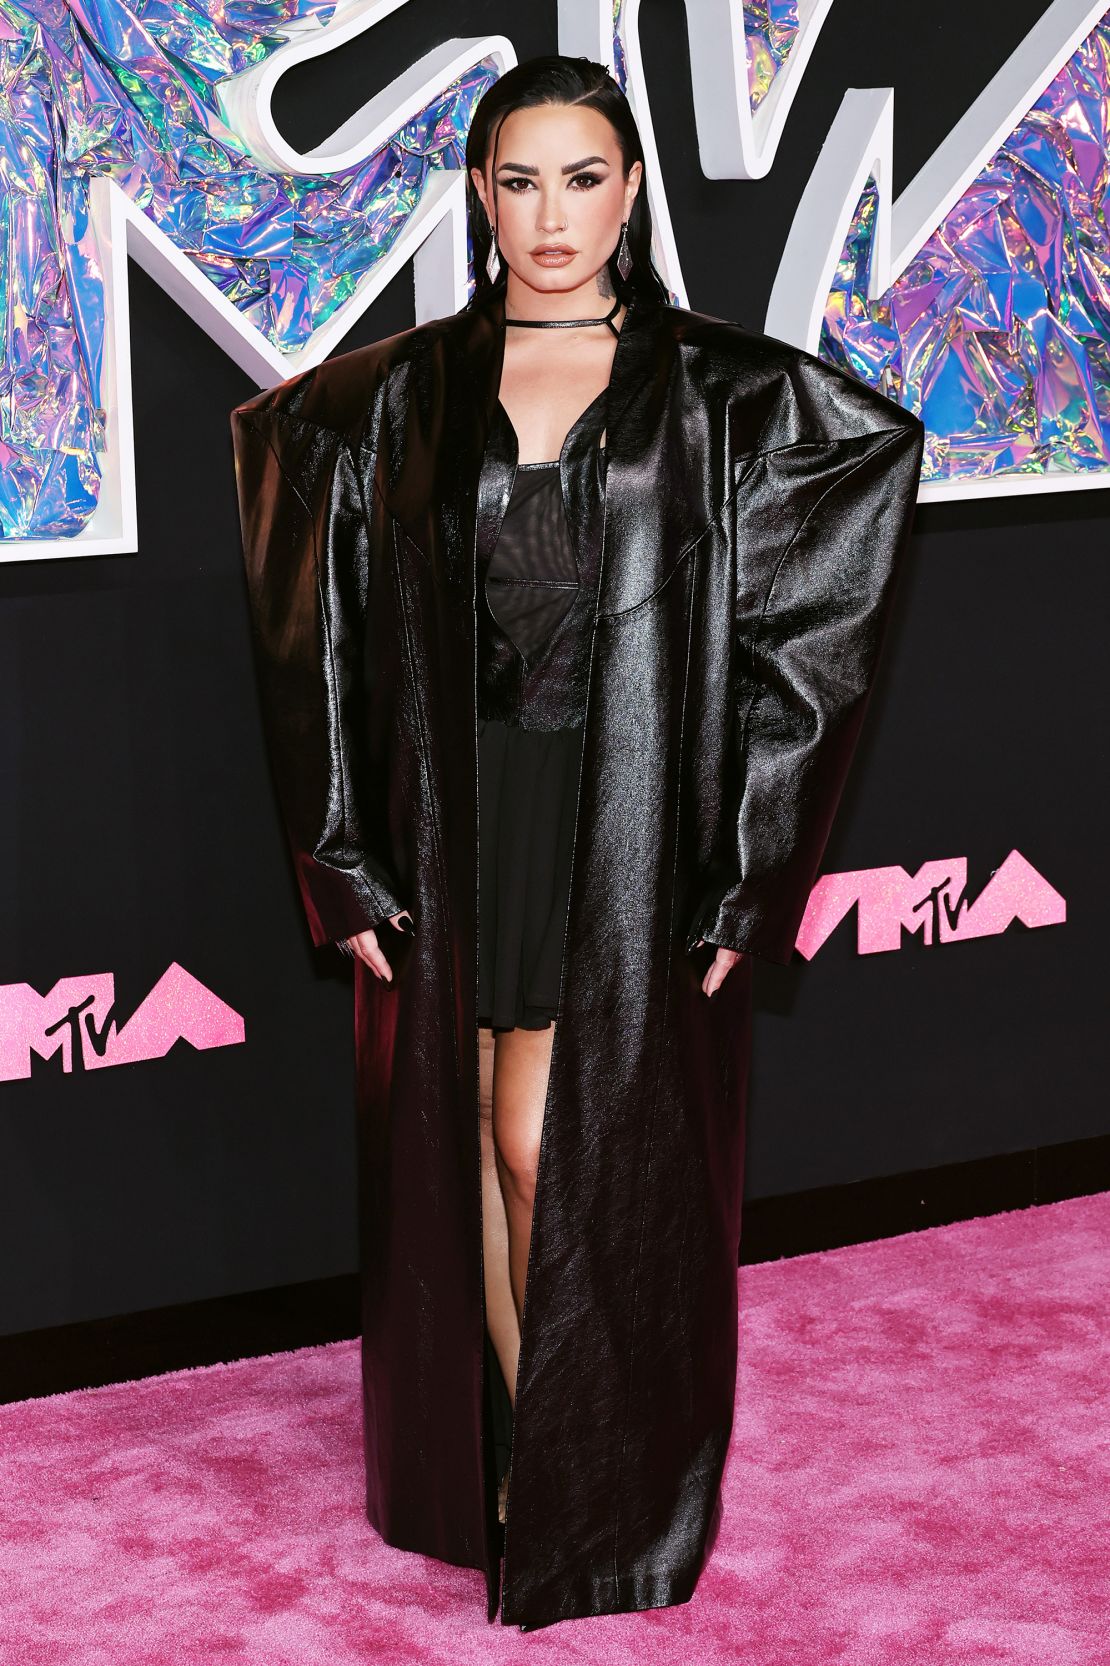 Demi Lovato looked edgy in an oversized geometric black coat layered with a mesh and leather mini dress from the up-and-coming Chinese label Buerlangma.